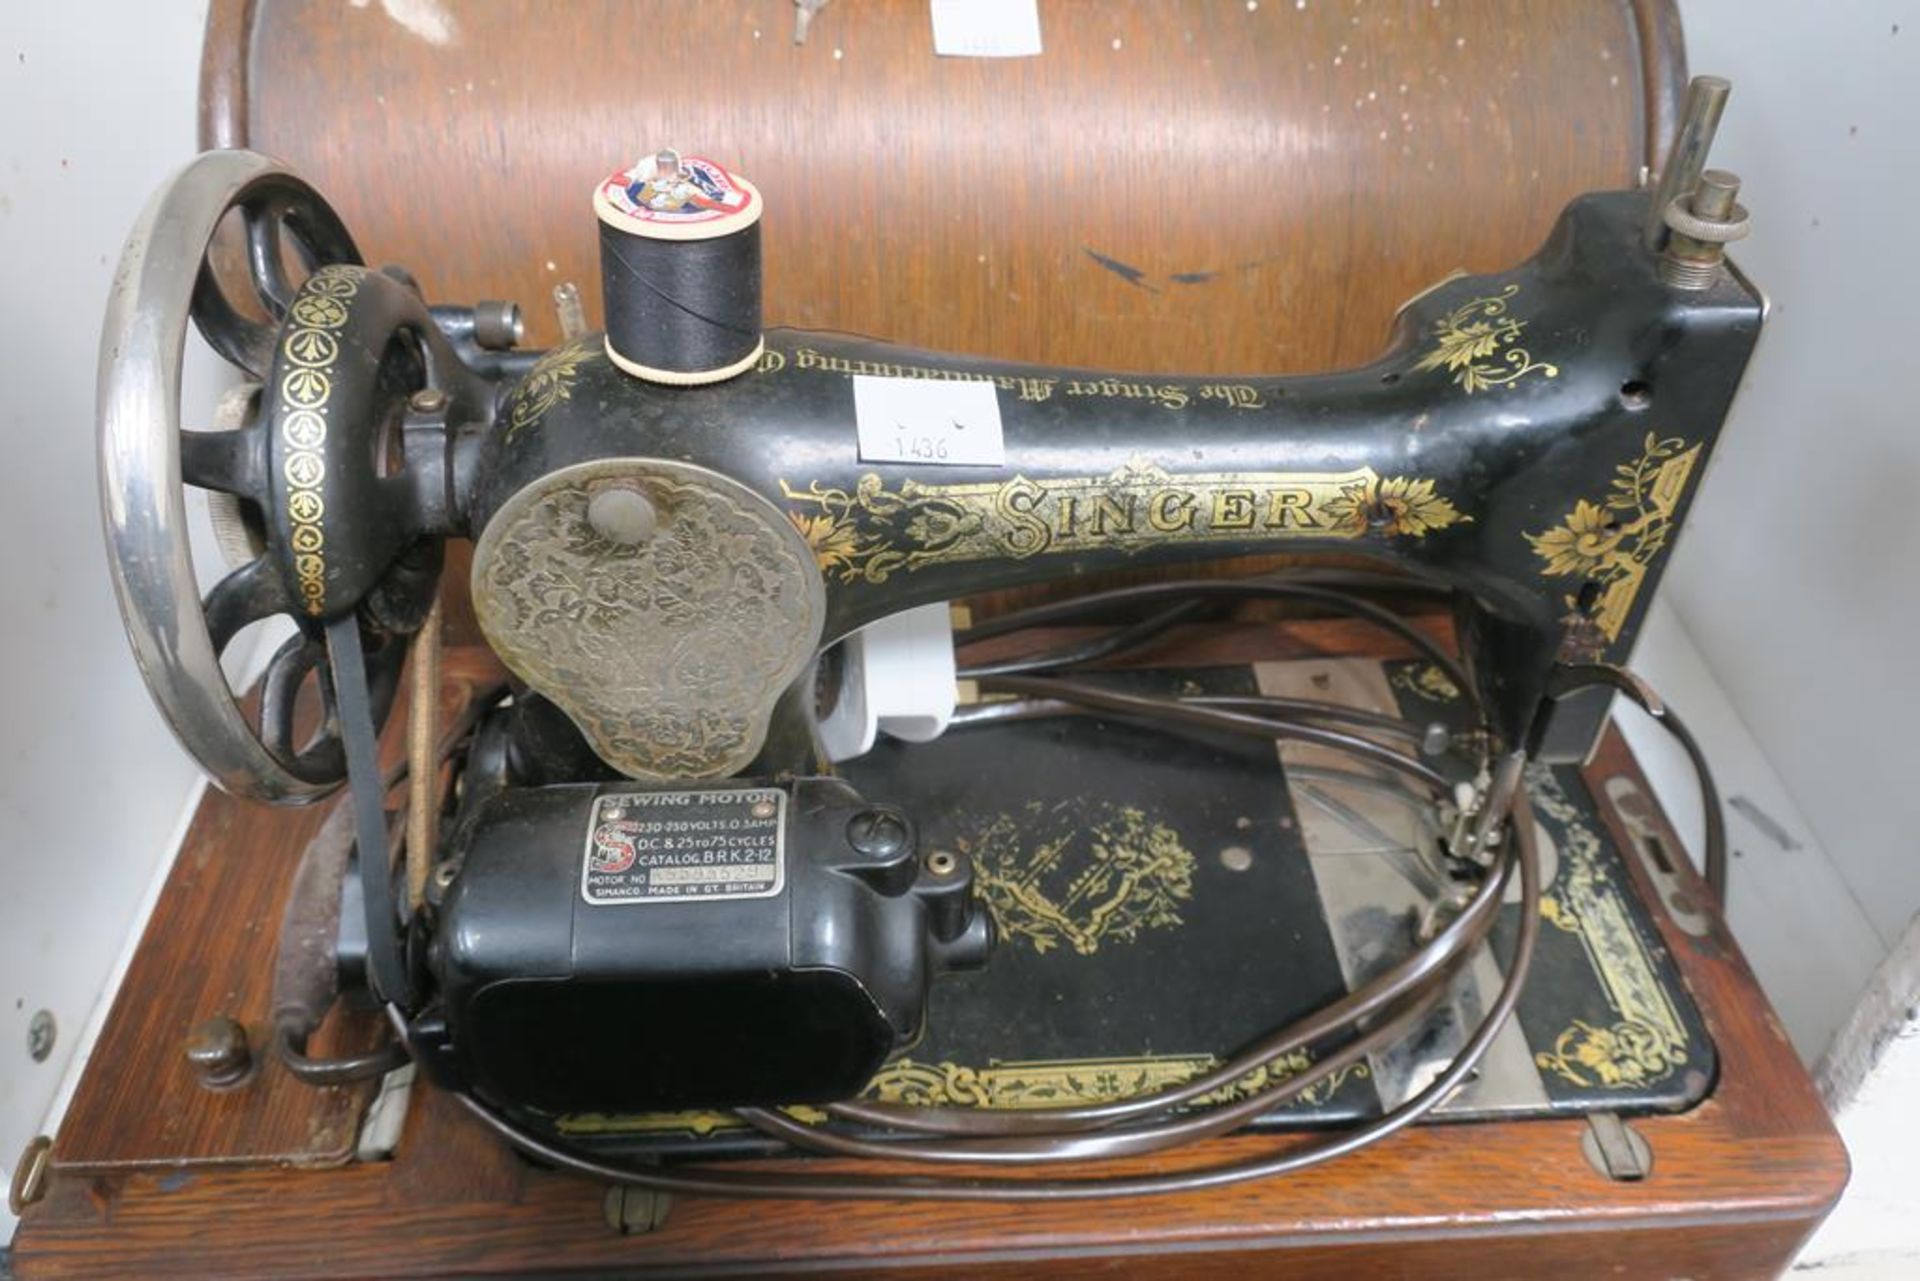 Singer Sewing Machine with Case - Image 3 of 3